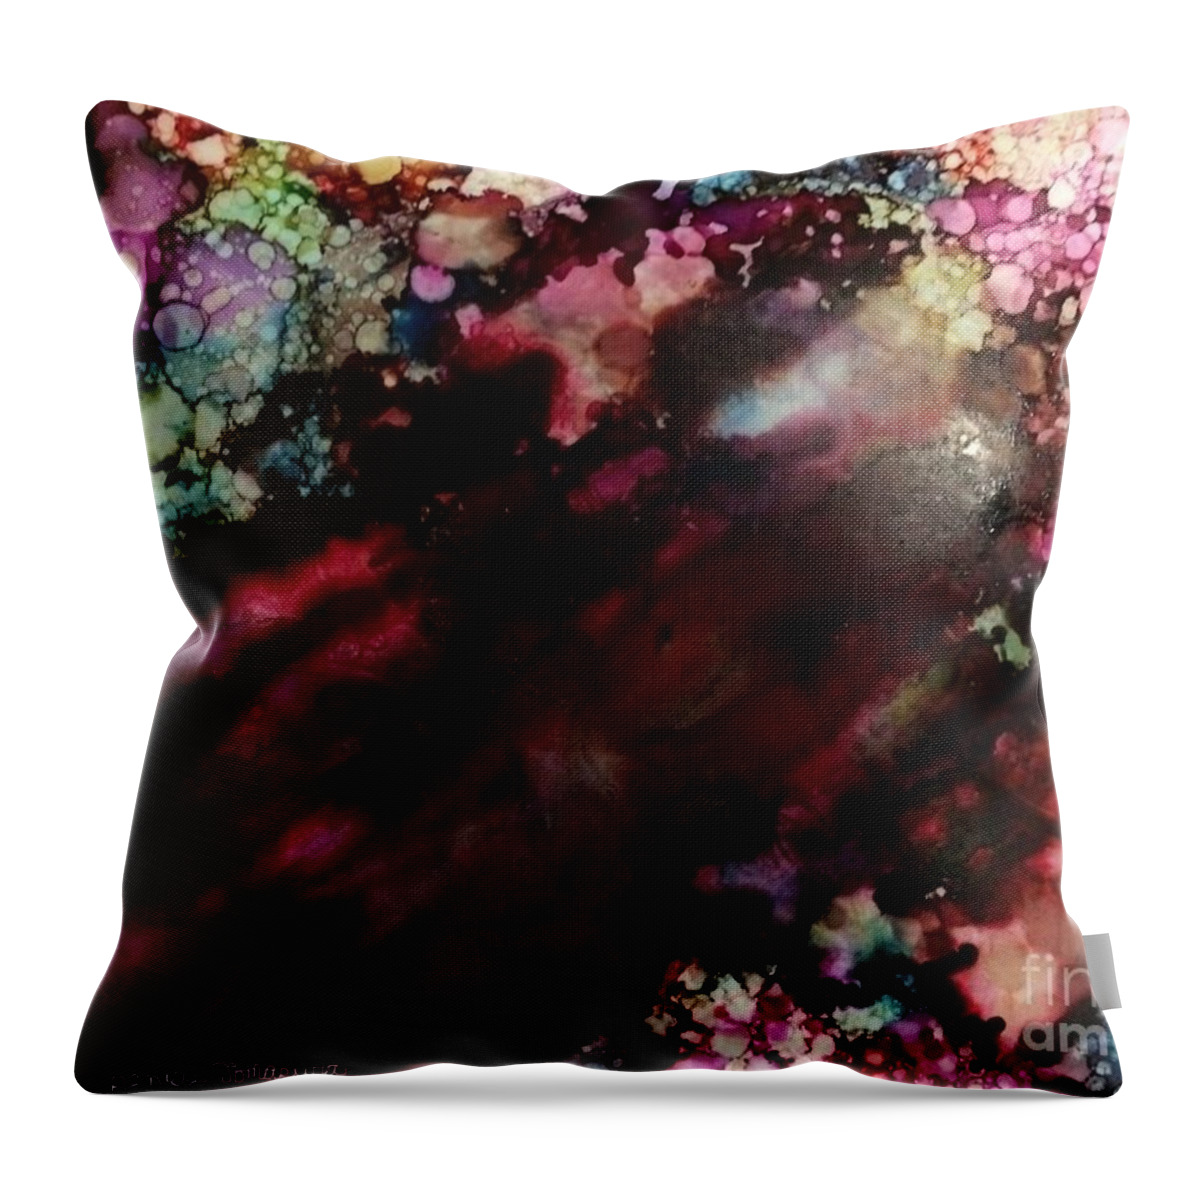 Alcohol Ink Throw Pillow featuring the painting Way Out by Denise Tomasura